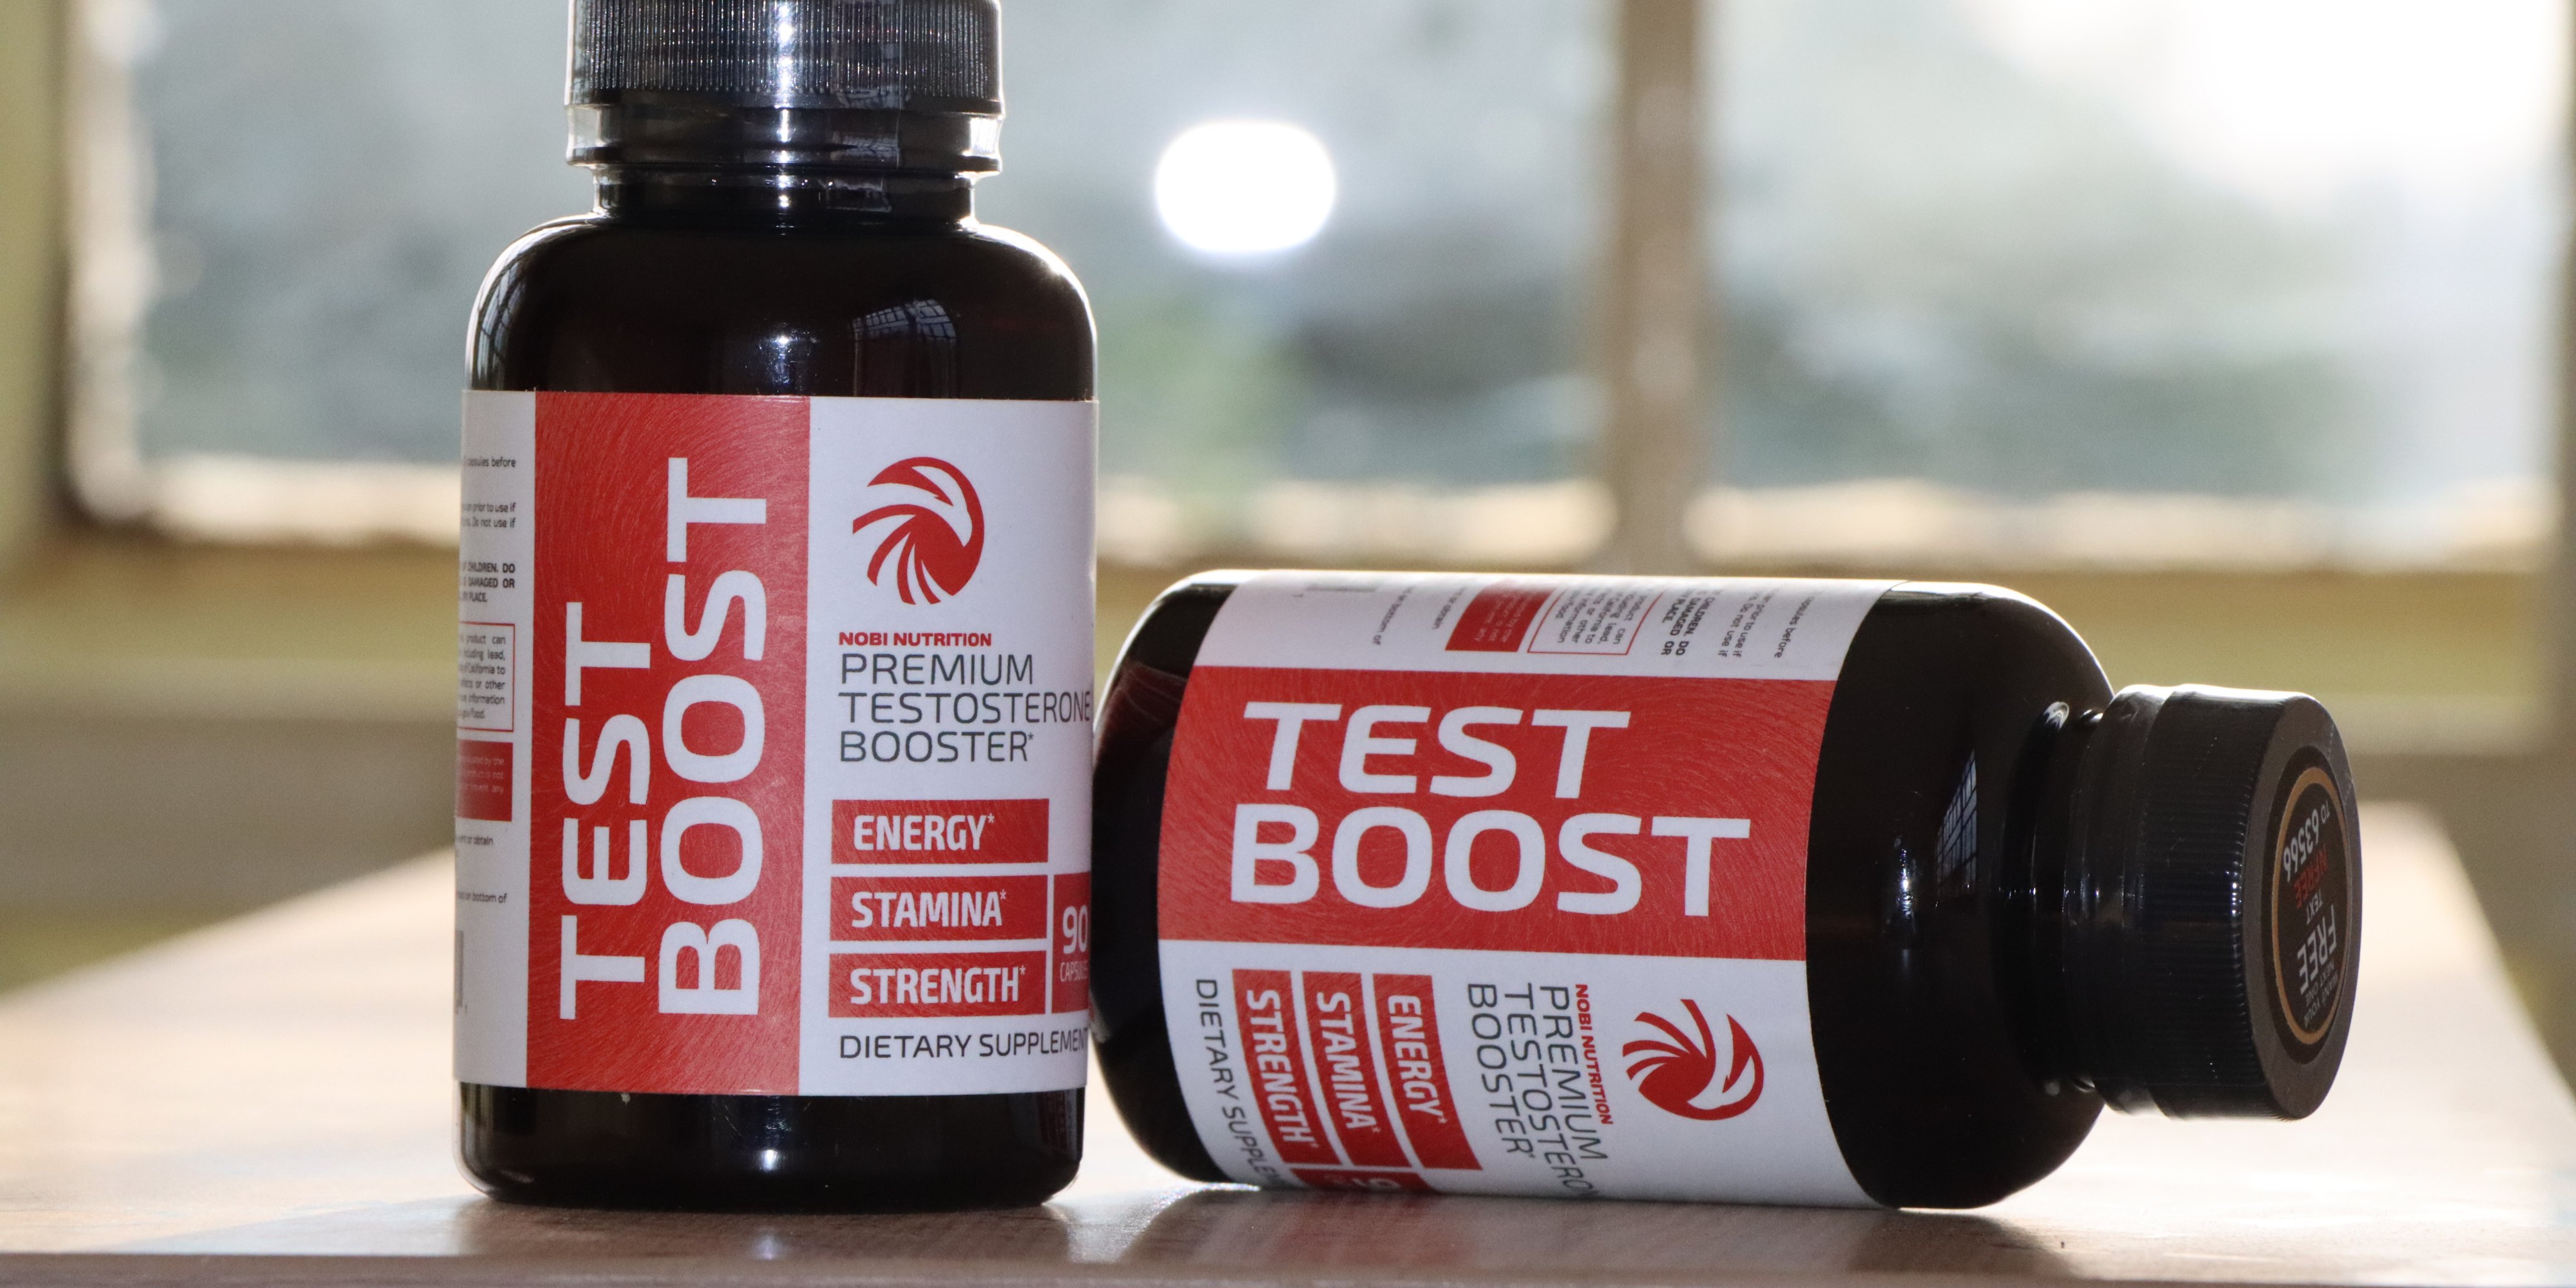 VitJoy on X: Feel the power with Nobi Nutrition Test Boost! With  ingredients like Tribulus Terrestris and Horny Goat Weed, it's designed to  support testosterone levels, energy, and stamina. Pushing through plateaus